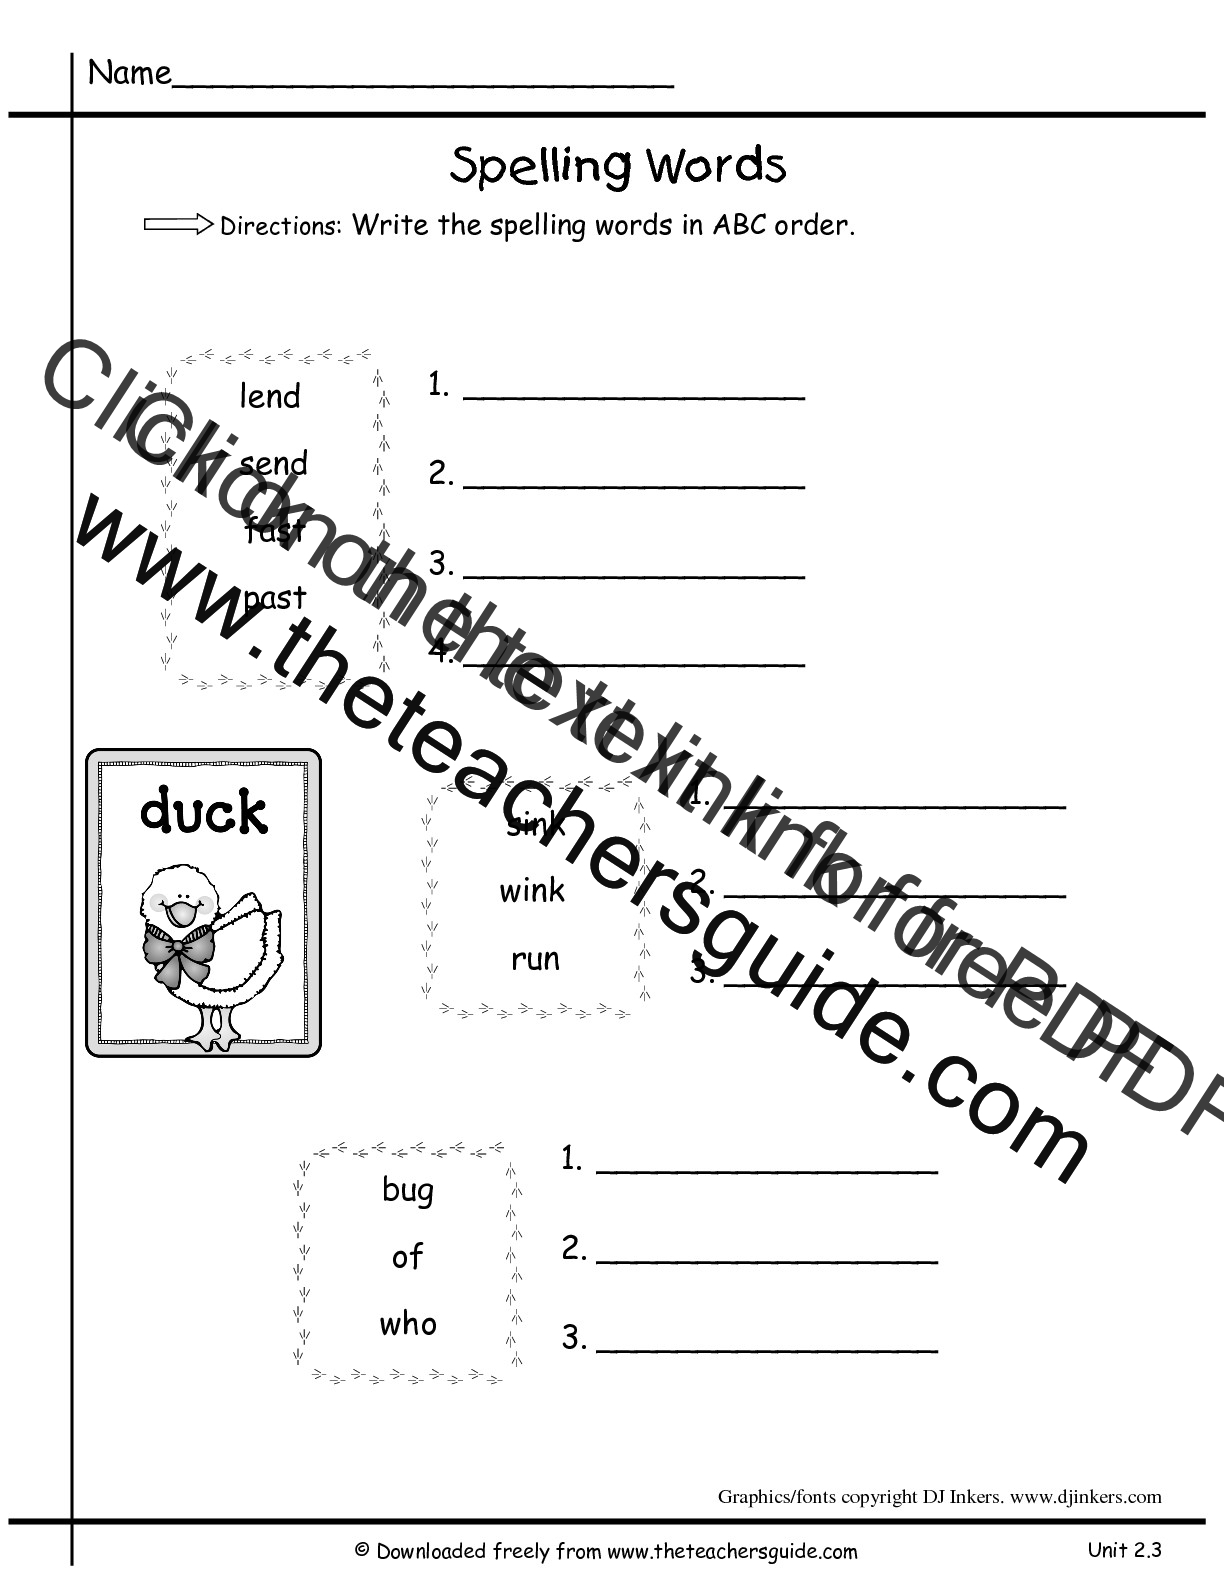 lyric writing activity for first grade